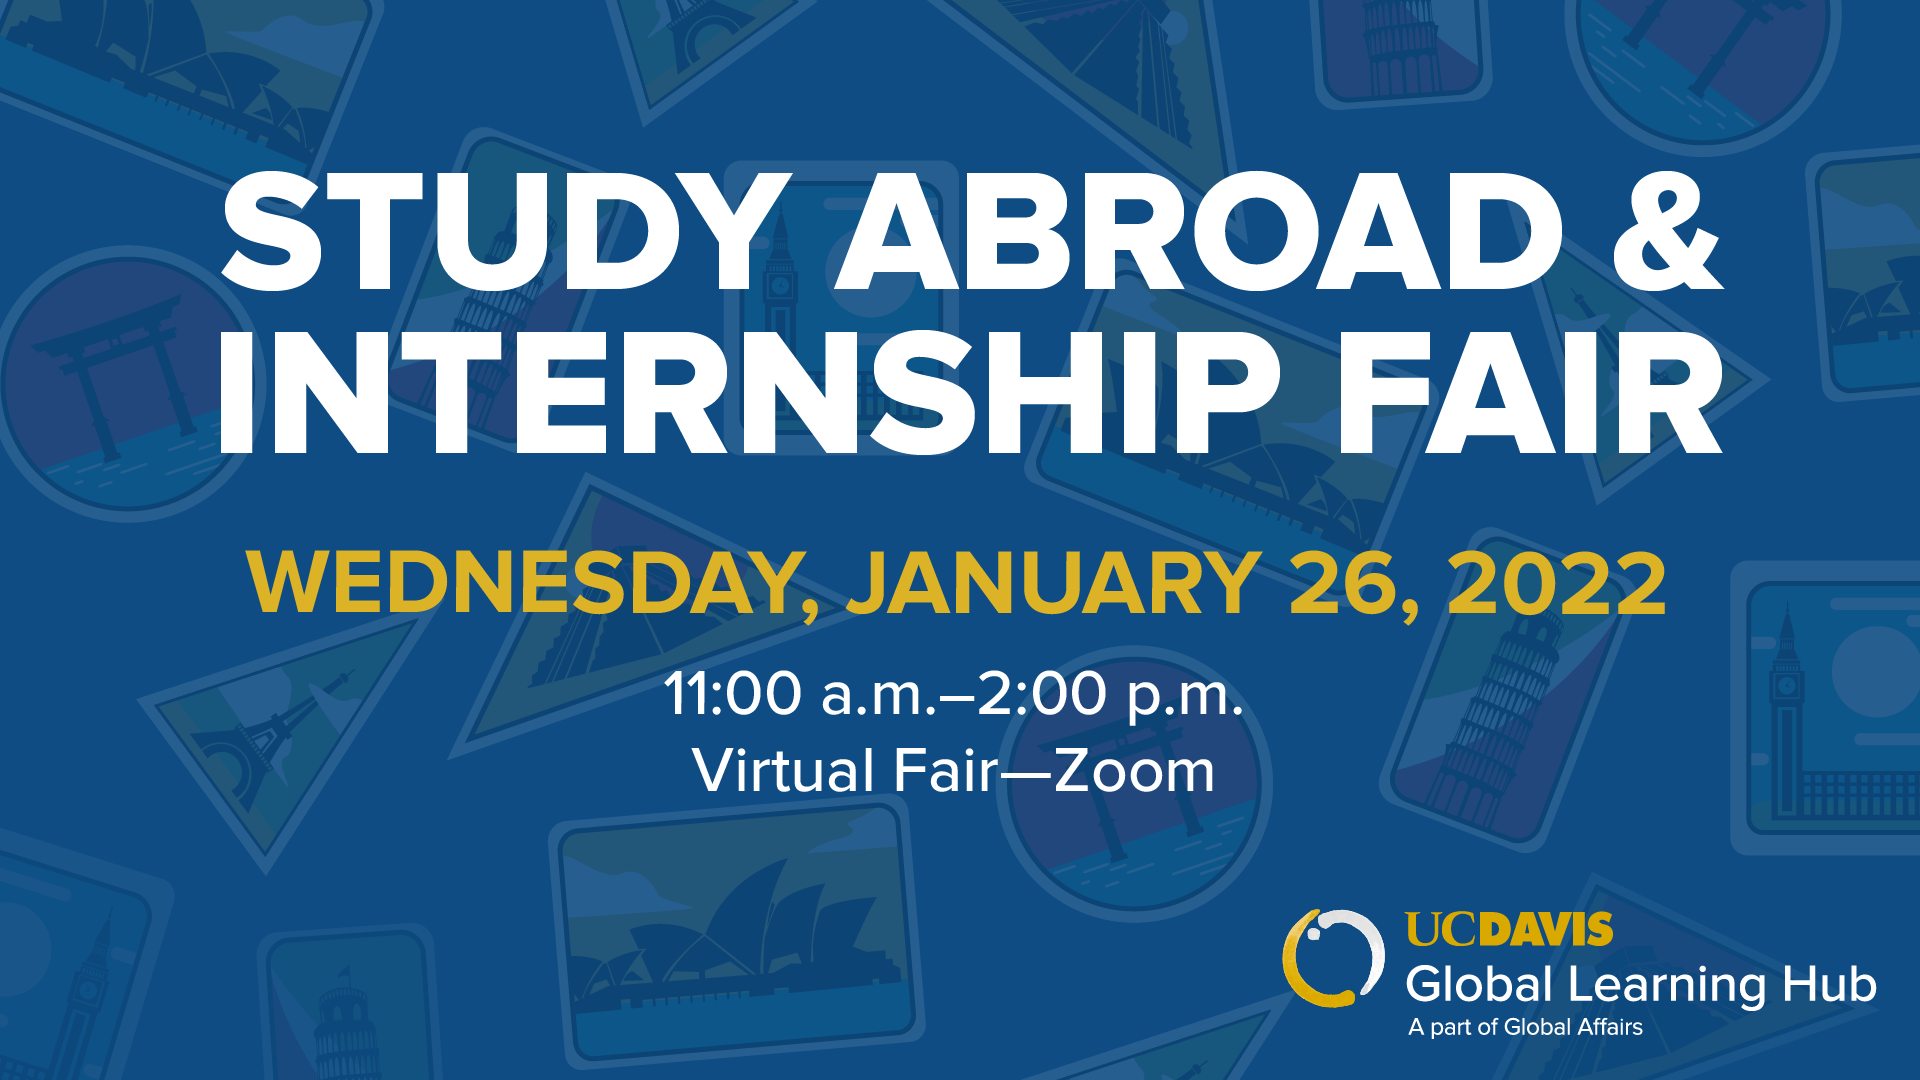 Graphic with text "Study Abroad and Internship Fair"